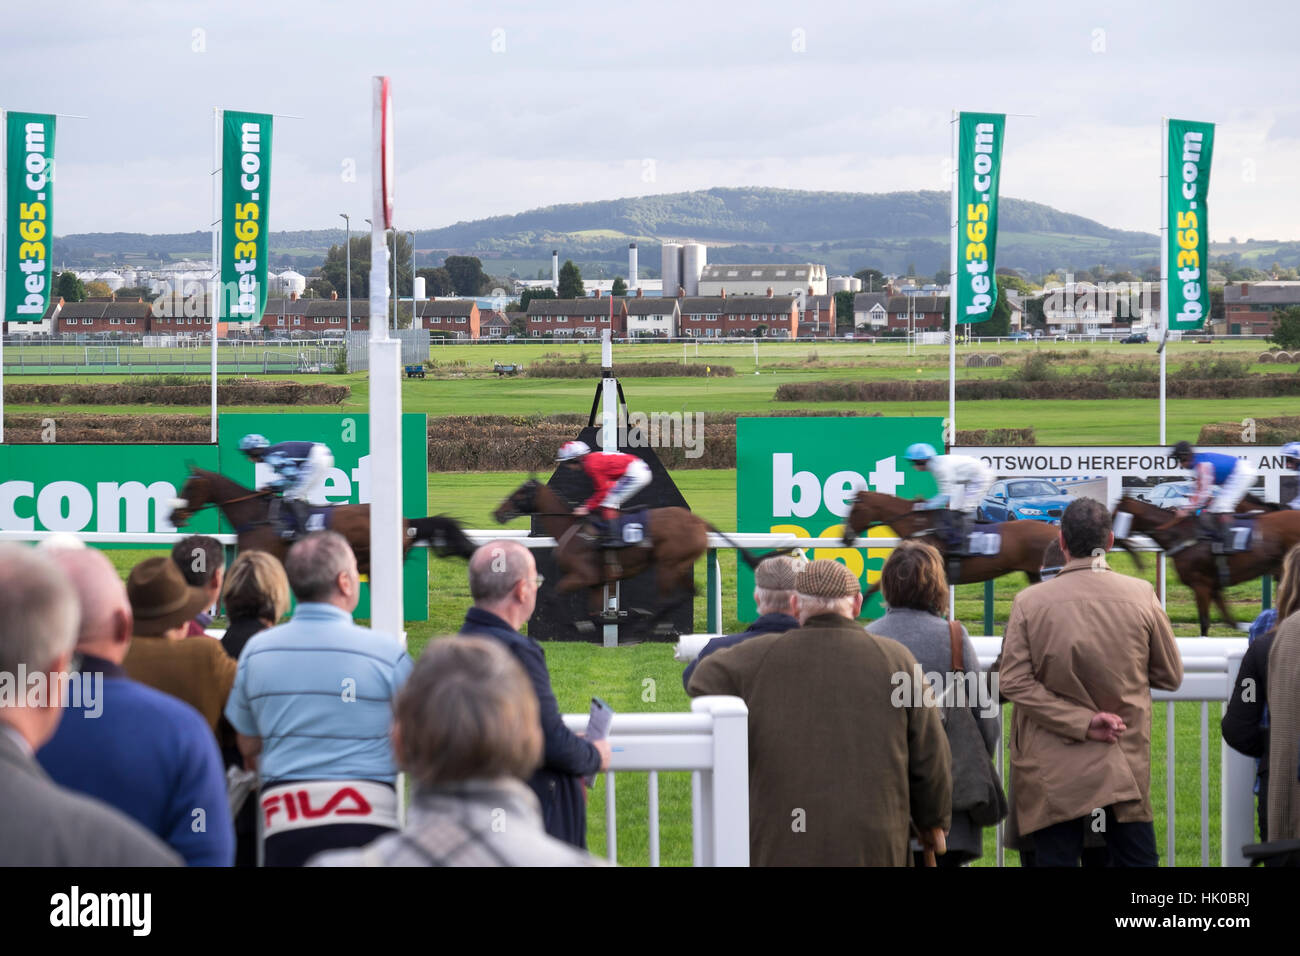 Finishing line and crowd at horse racing event Stock Photo